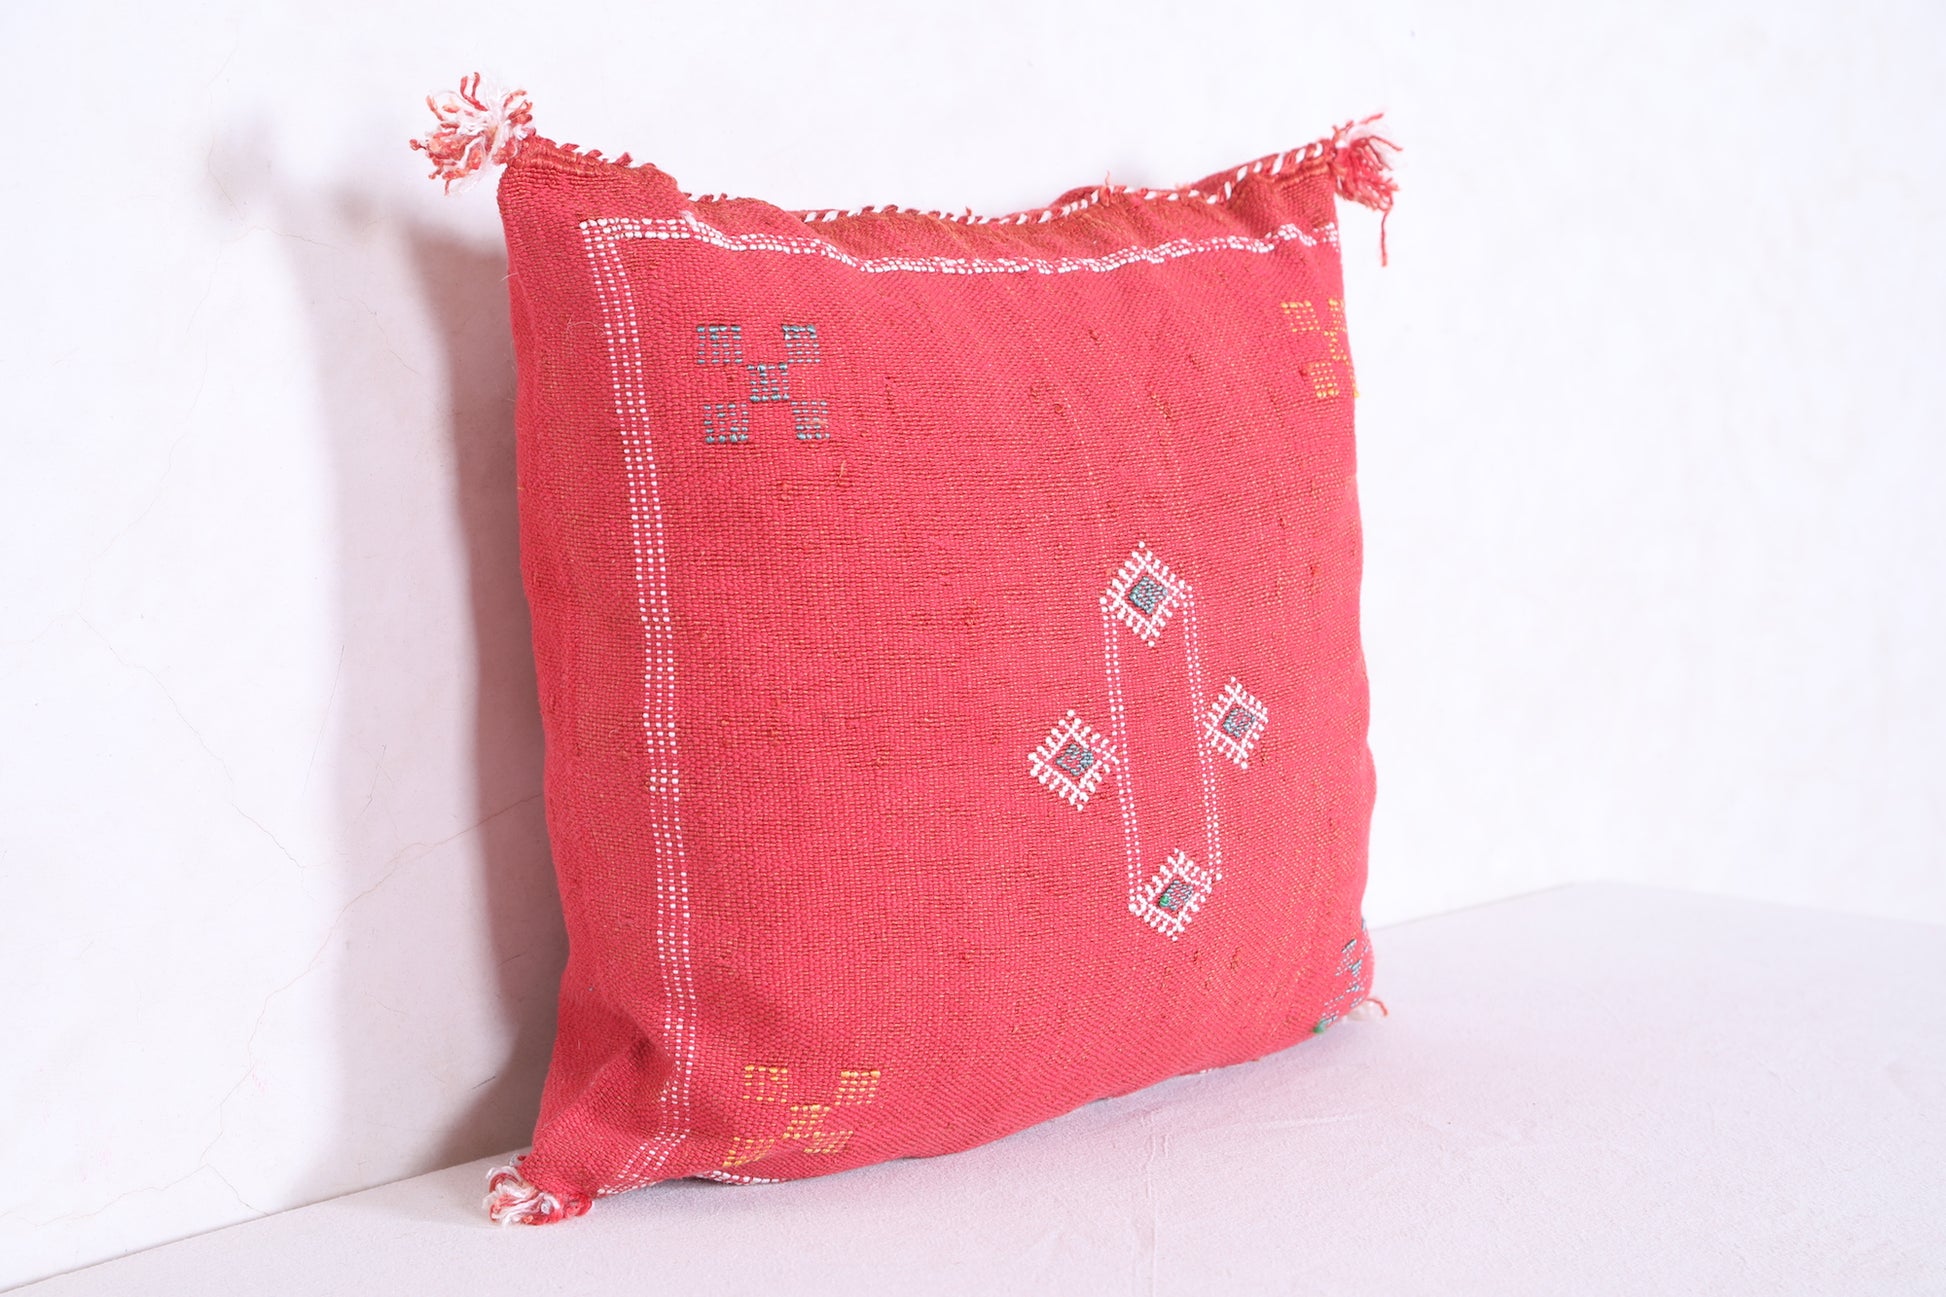 Moroccan handmade kilim pillow 16.9 INCHES X 18.5 INCHES